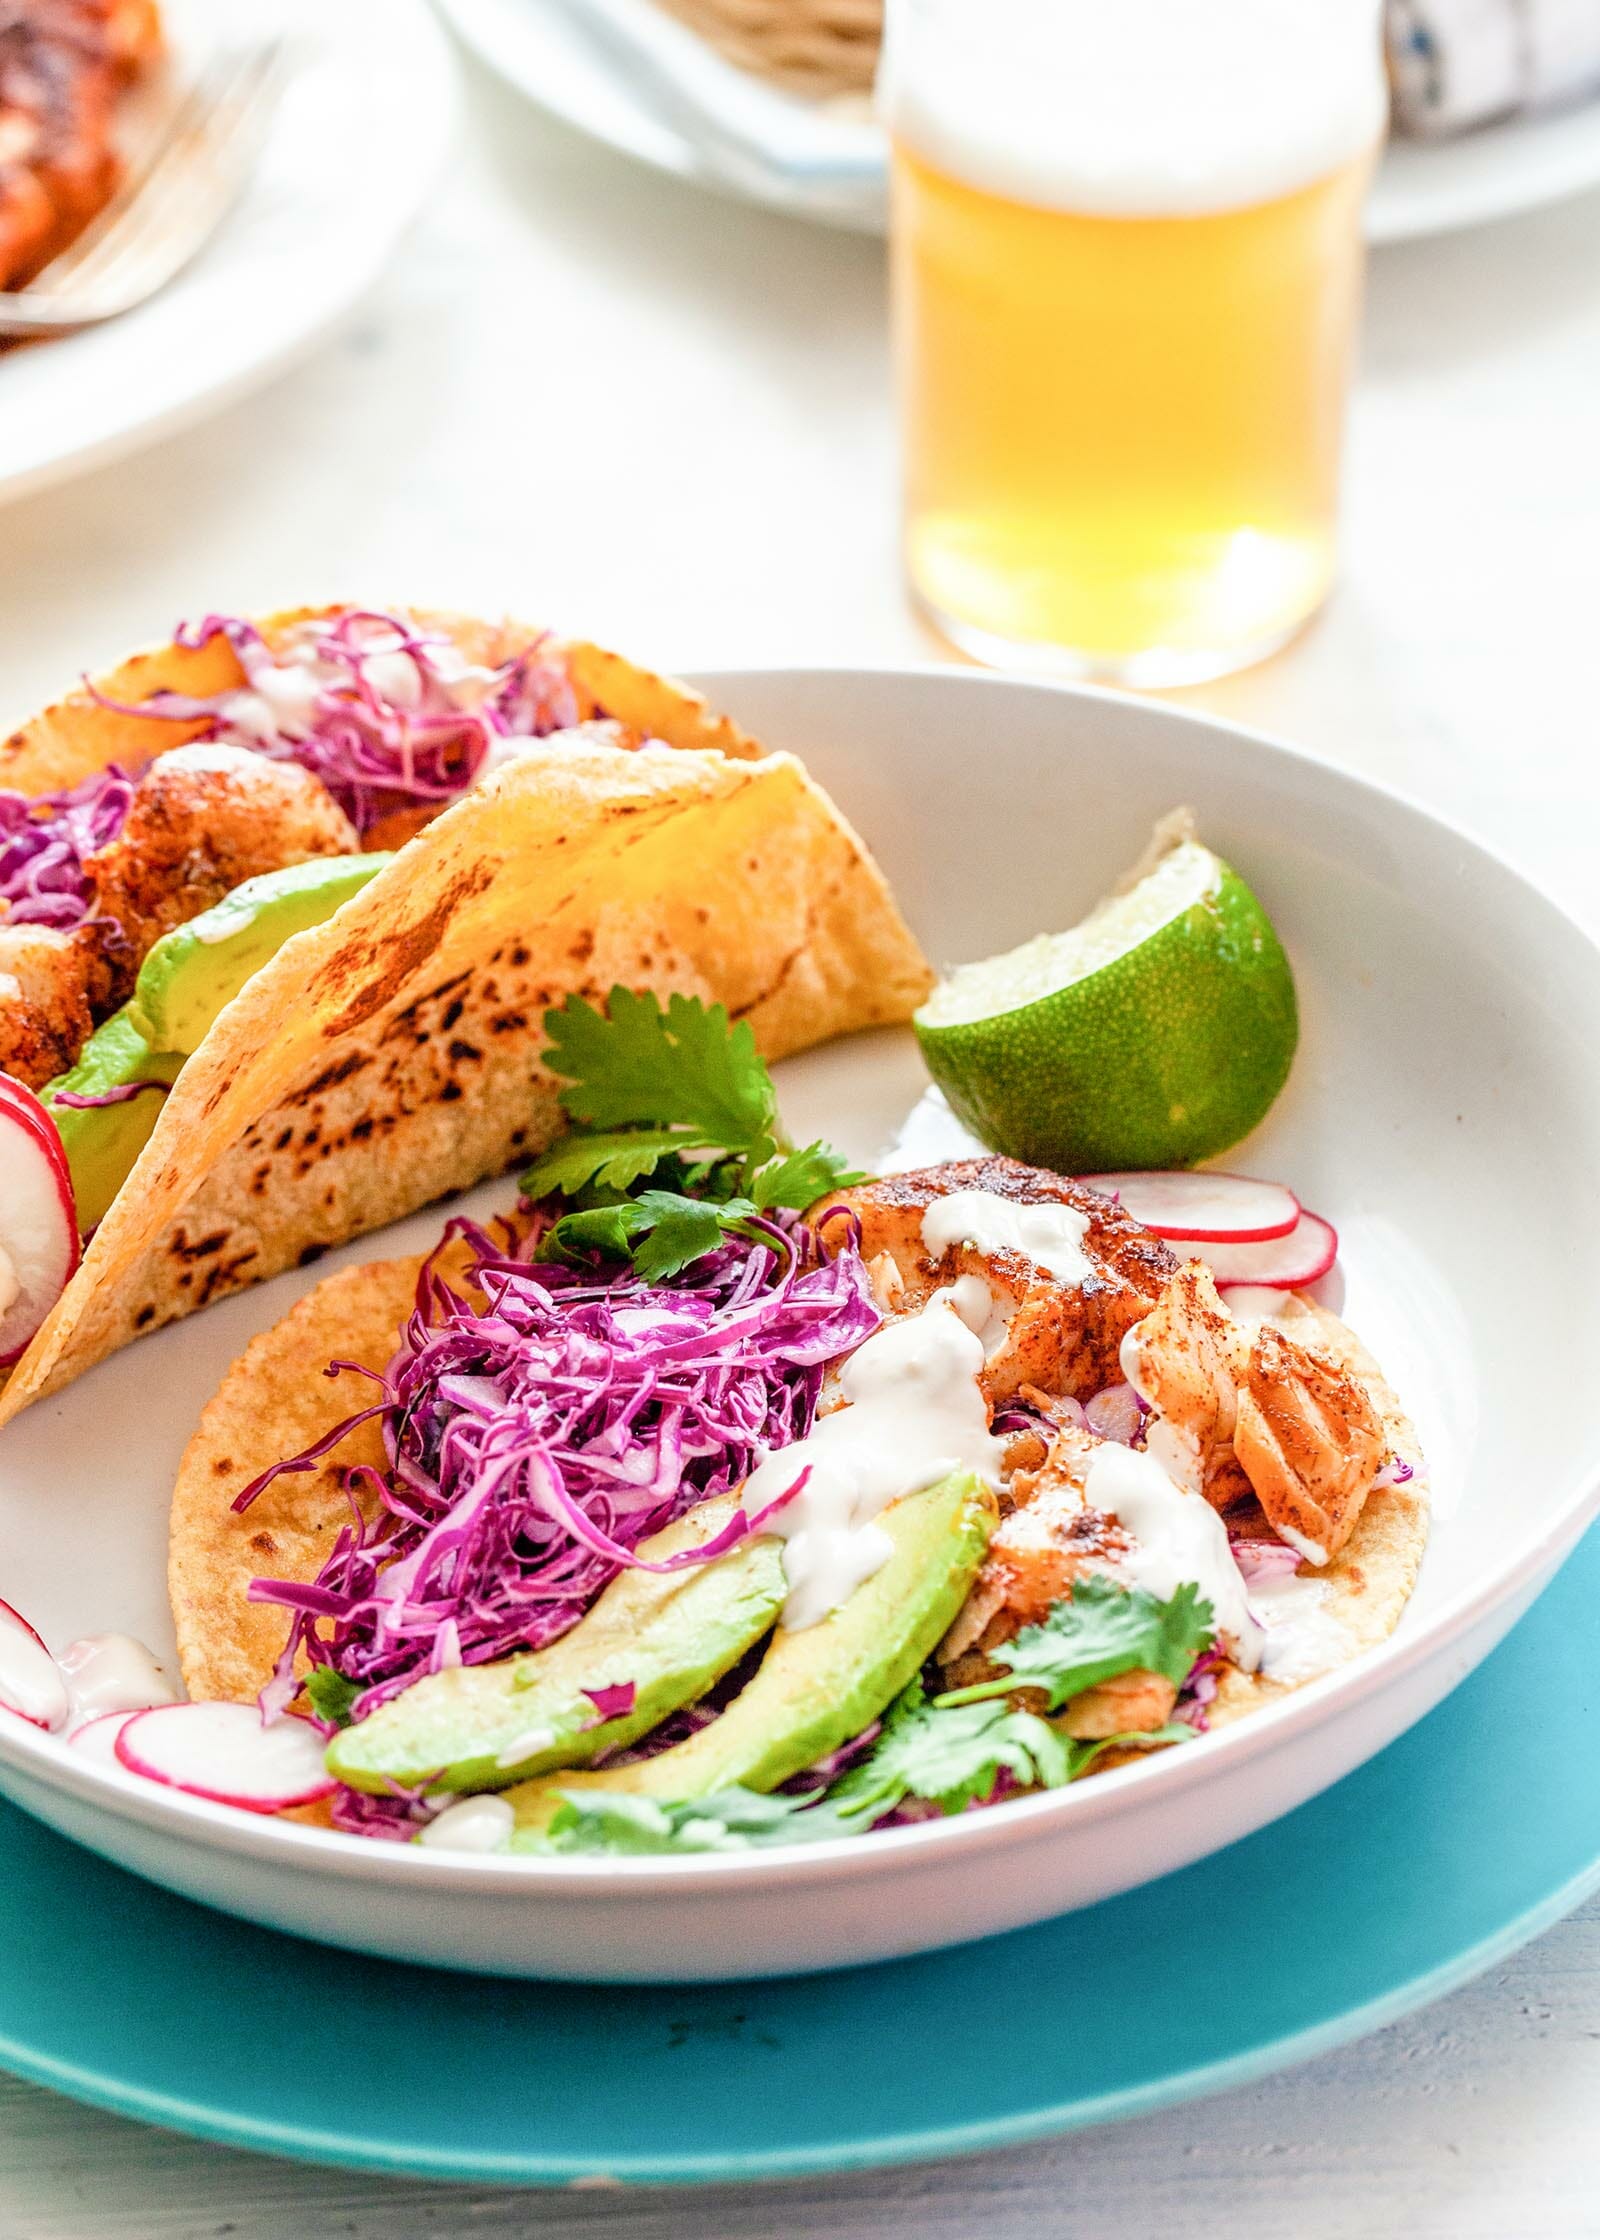 The best fish tacos on a plate. Corn tortillas layered with fish, cabbage, avocado, cilantro and lime.